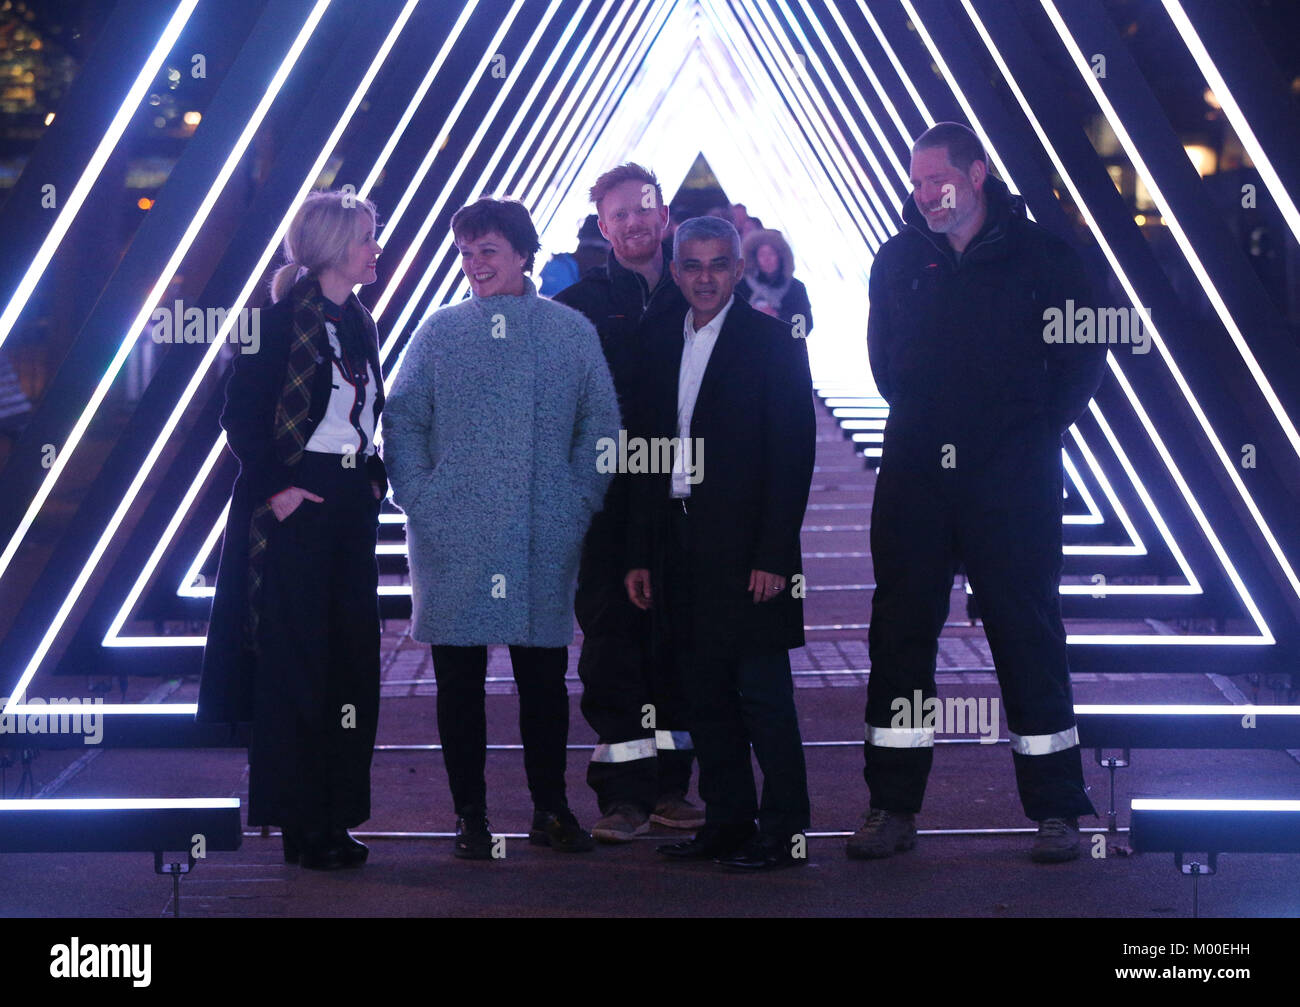 (Left-right front) Deputy Mayor of Culture and Creative Industries Justin Simmons, Director of Artichoke and Lumiere London Artistic Director Helen Marriage and Mayor of London Sadiq Khan next to The Wave by Vertigo on the Riverside Walkway, South Bank, during the Lumiere London light. Stock Photo